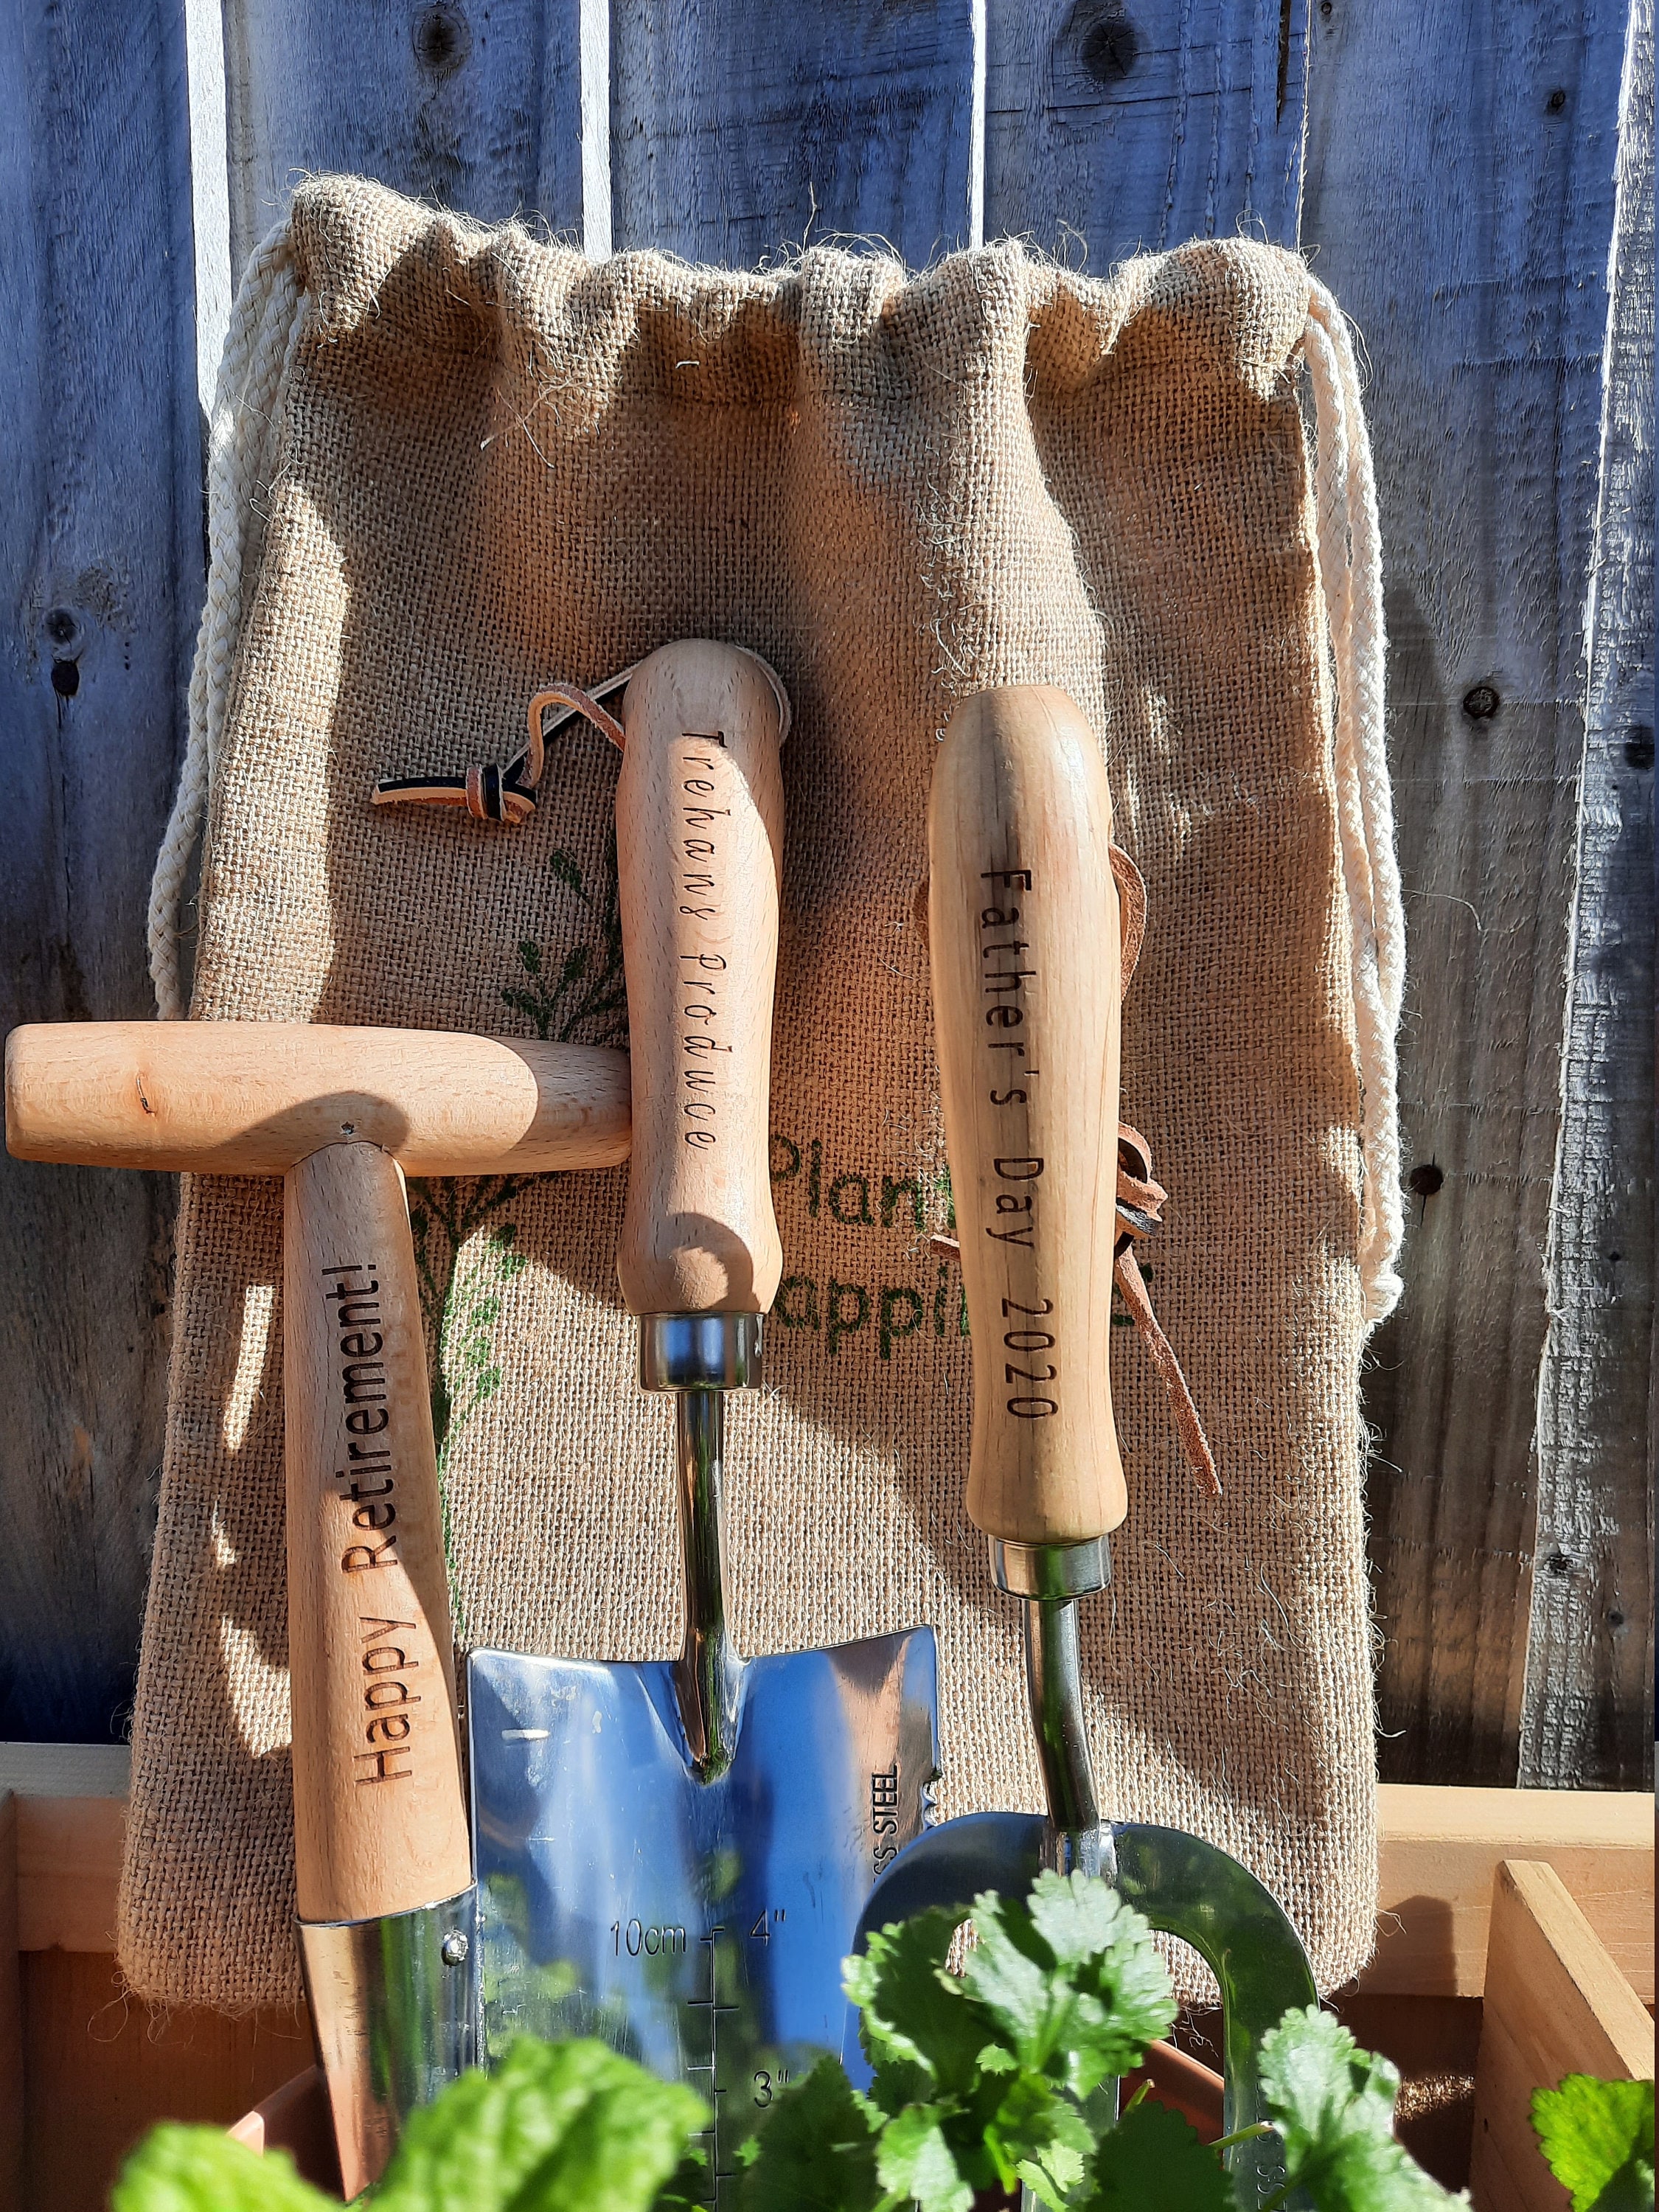 5. Customized Garden Tools with Engraving